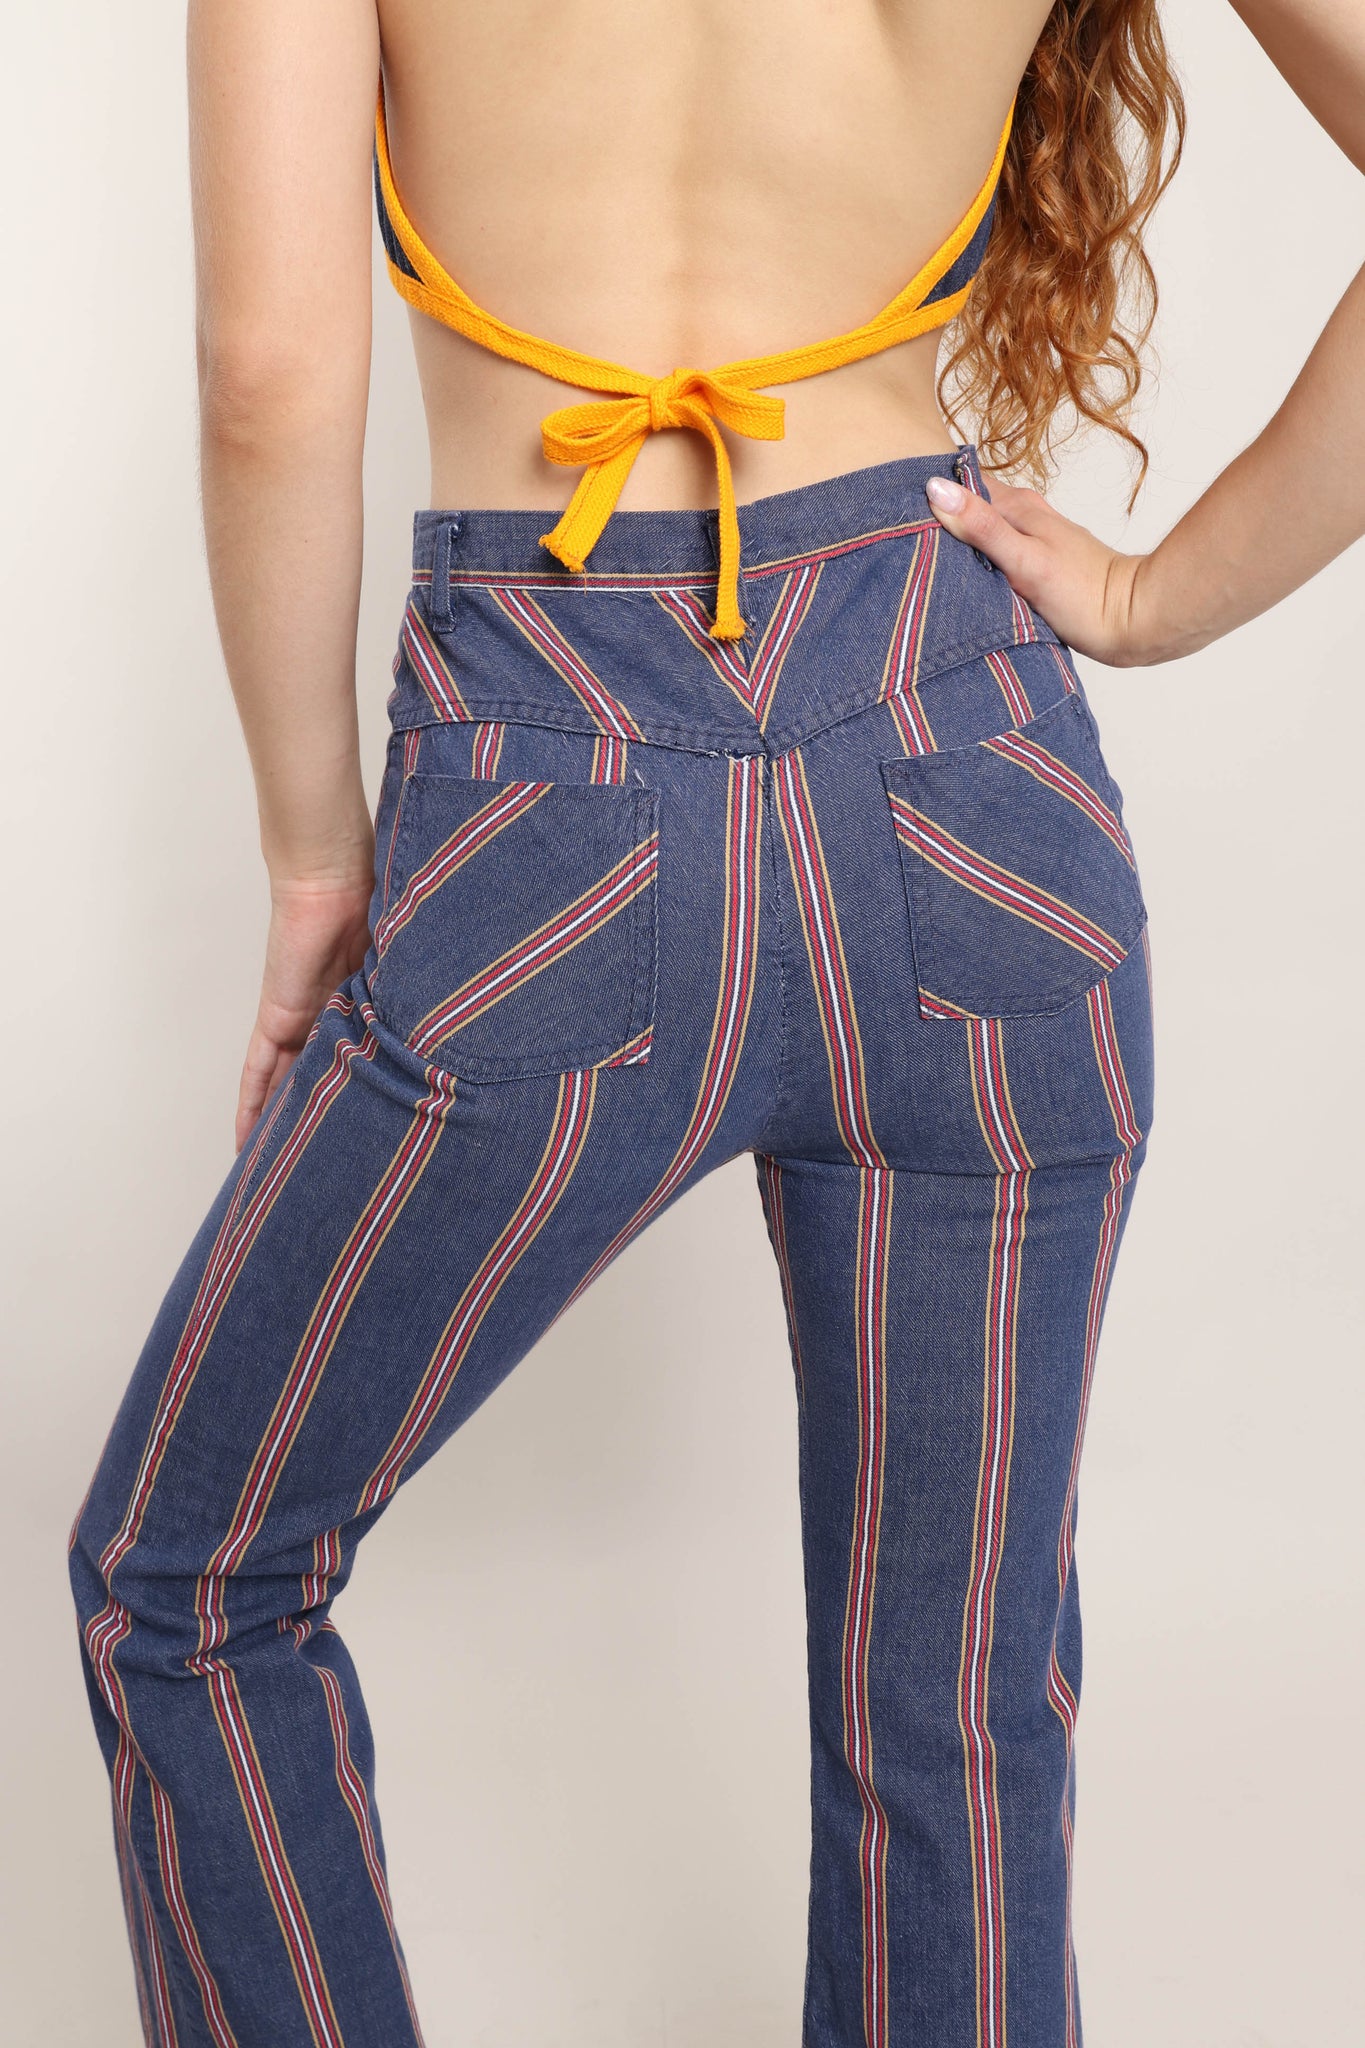 Shop Striped Seventies Flare Pants